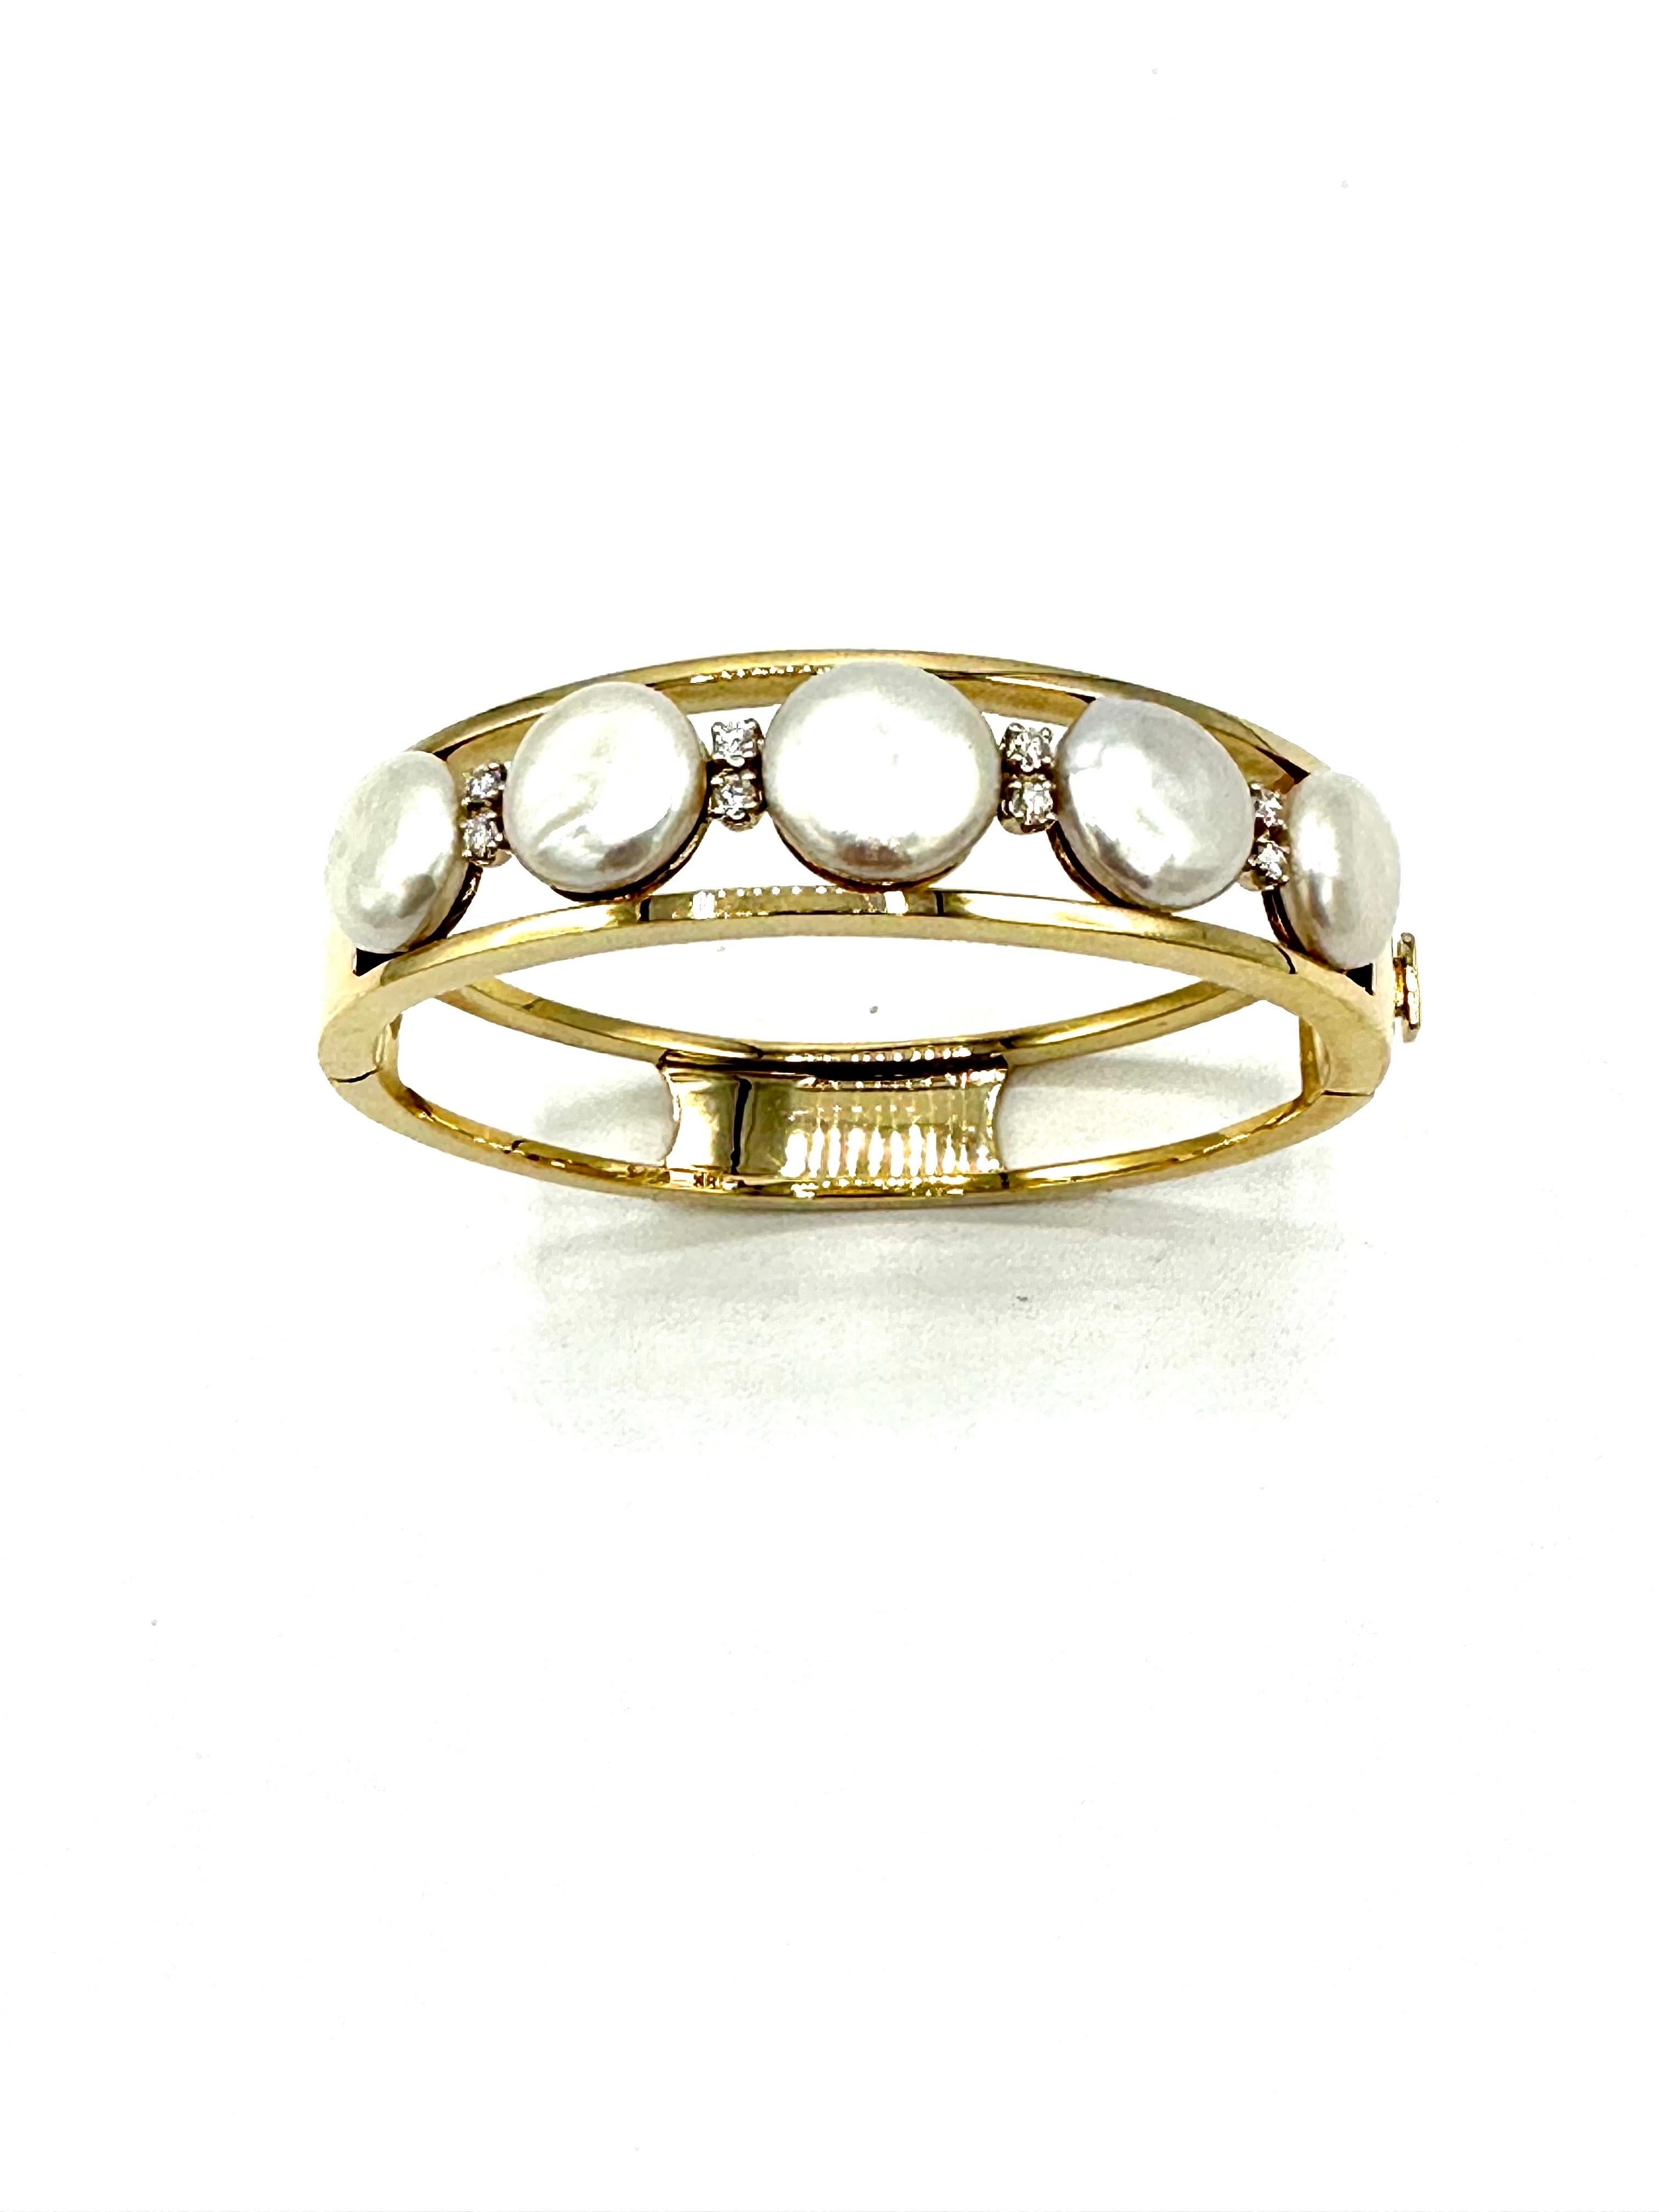 The bracelet that goes with everything!  This bangle designed by Gumps, features five coin Pearls set between two rows of 18K yellow gold, with two Diamonds in between each Pearl.  The eight round brilliant Diamonds have a total weight of 0.32